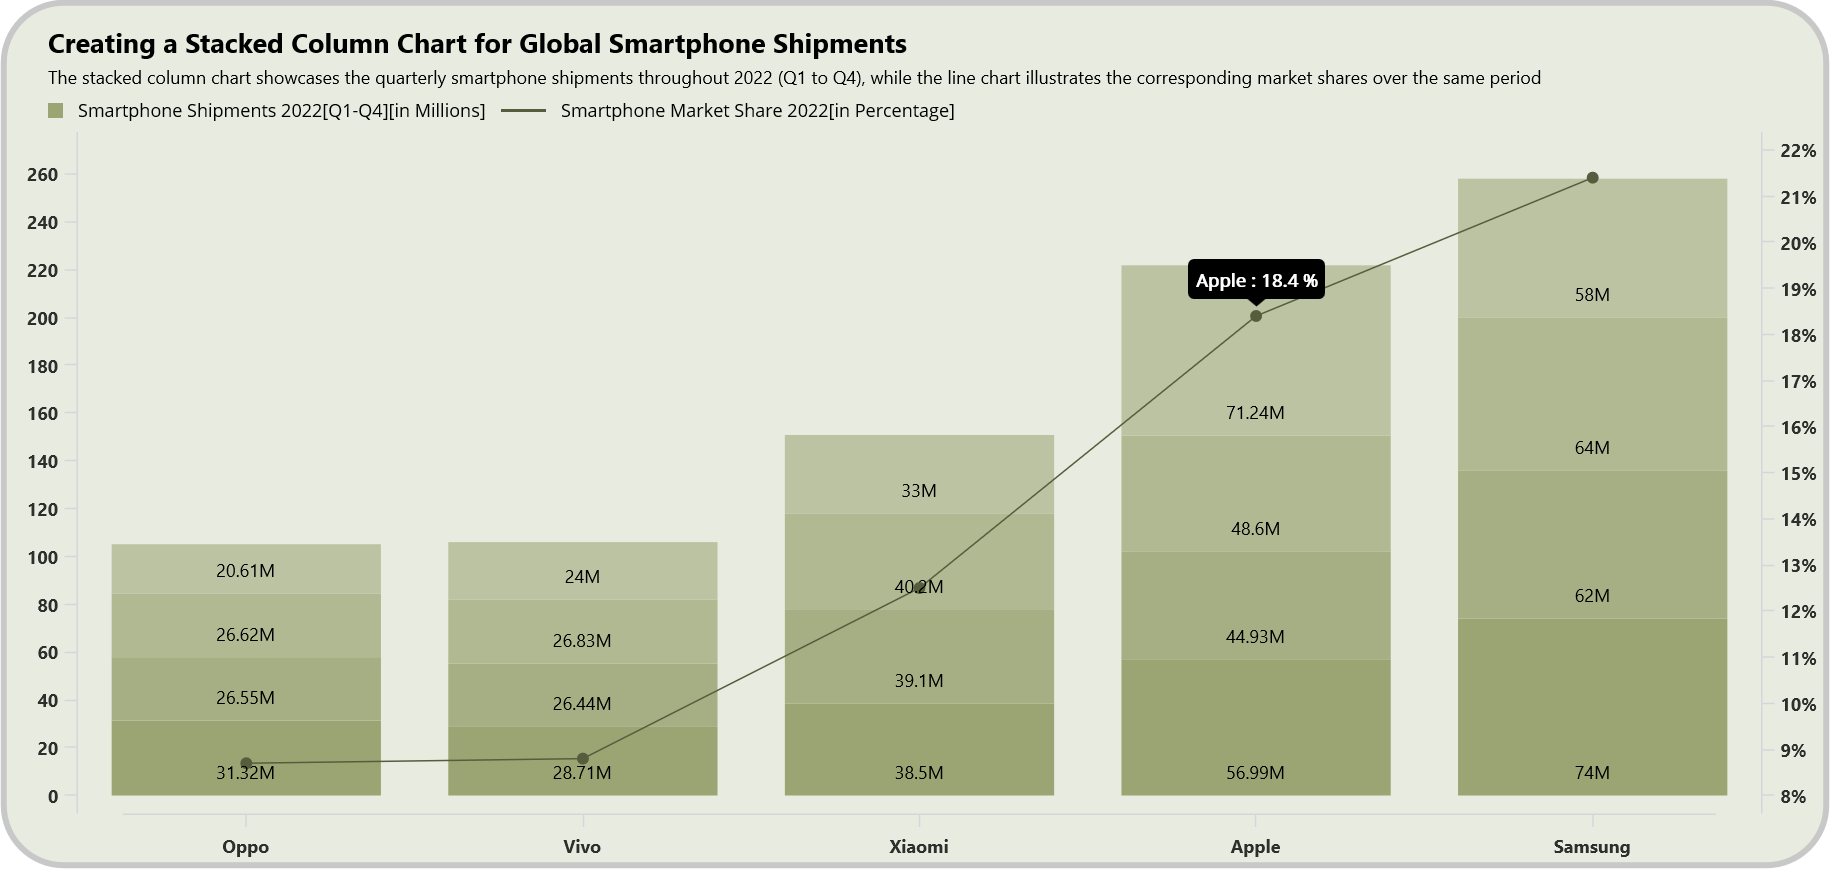 Stacked Column Chart for Global Smartphone Shipments